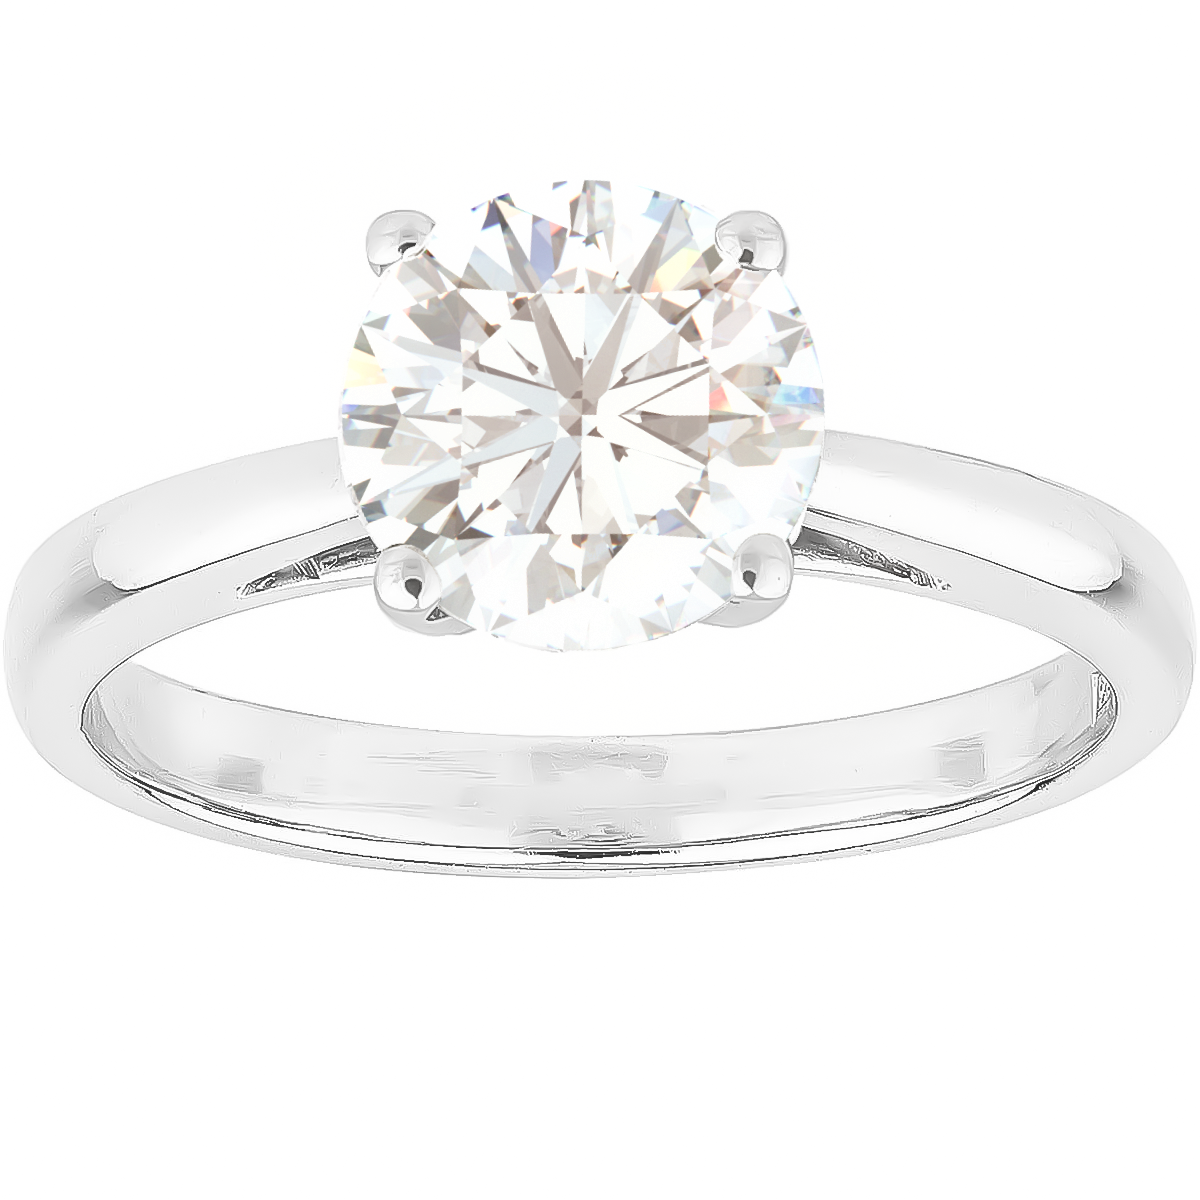 Sunsonite 0.90ct Very Light Diamond Solitaire Ring set in four claws setting of 18ct White Gold certified by DISA. Perfect for Wedding and Engagements.